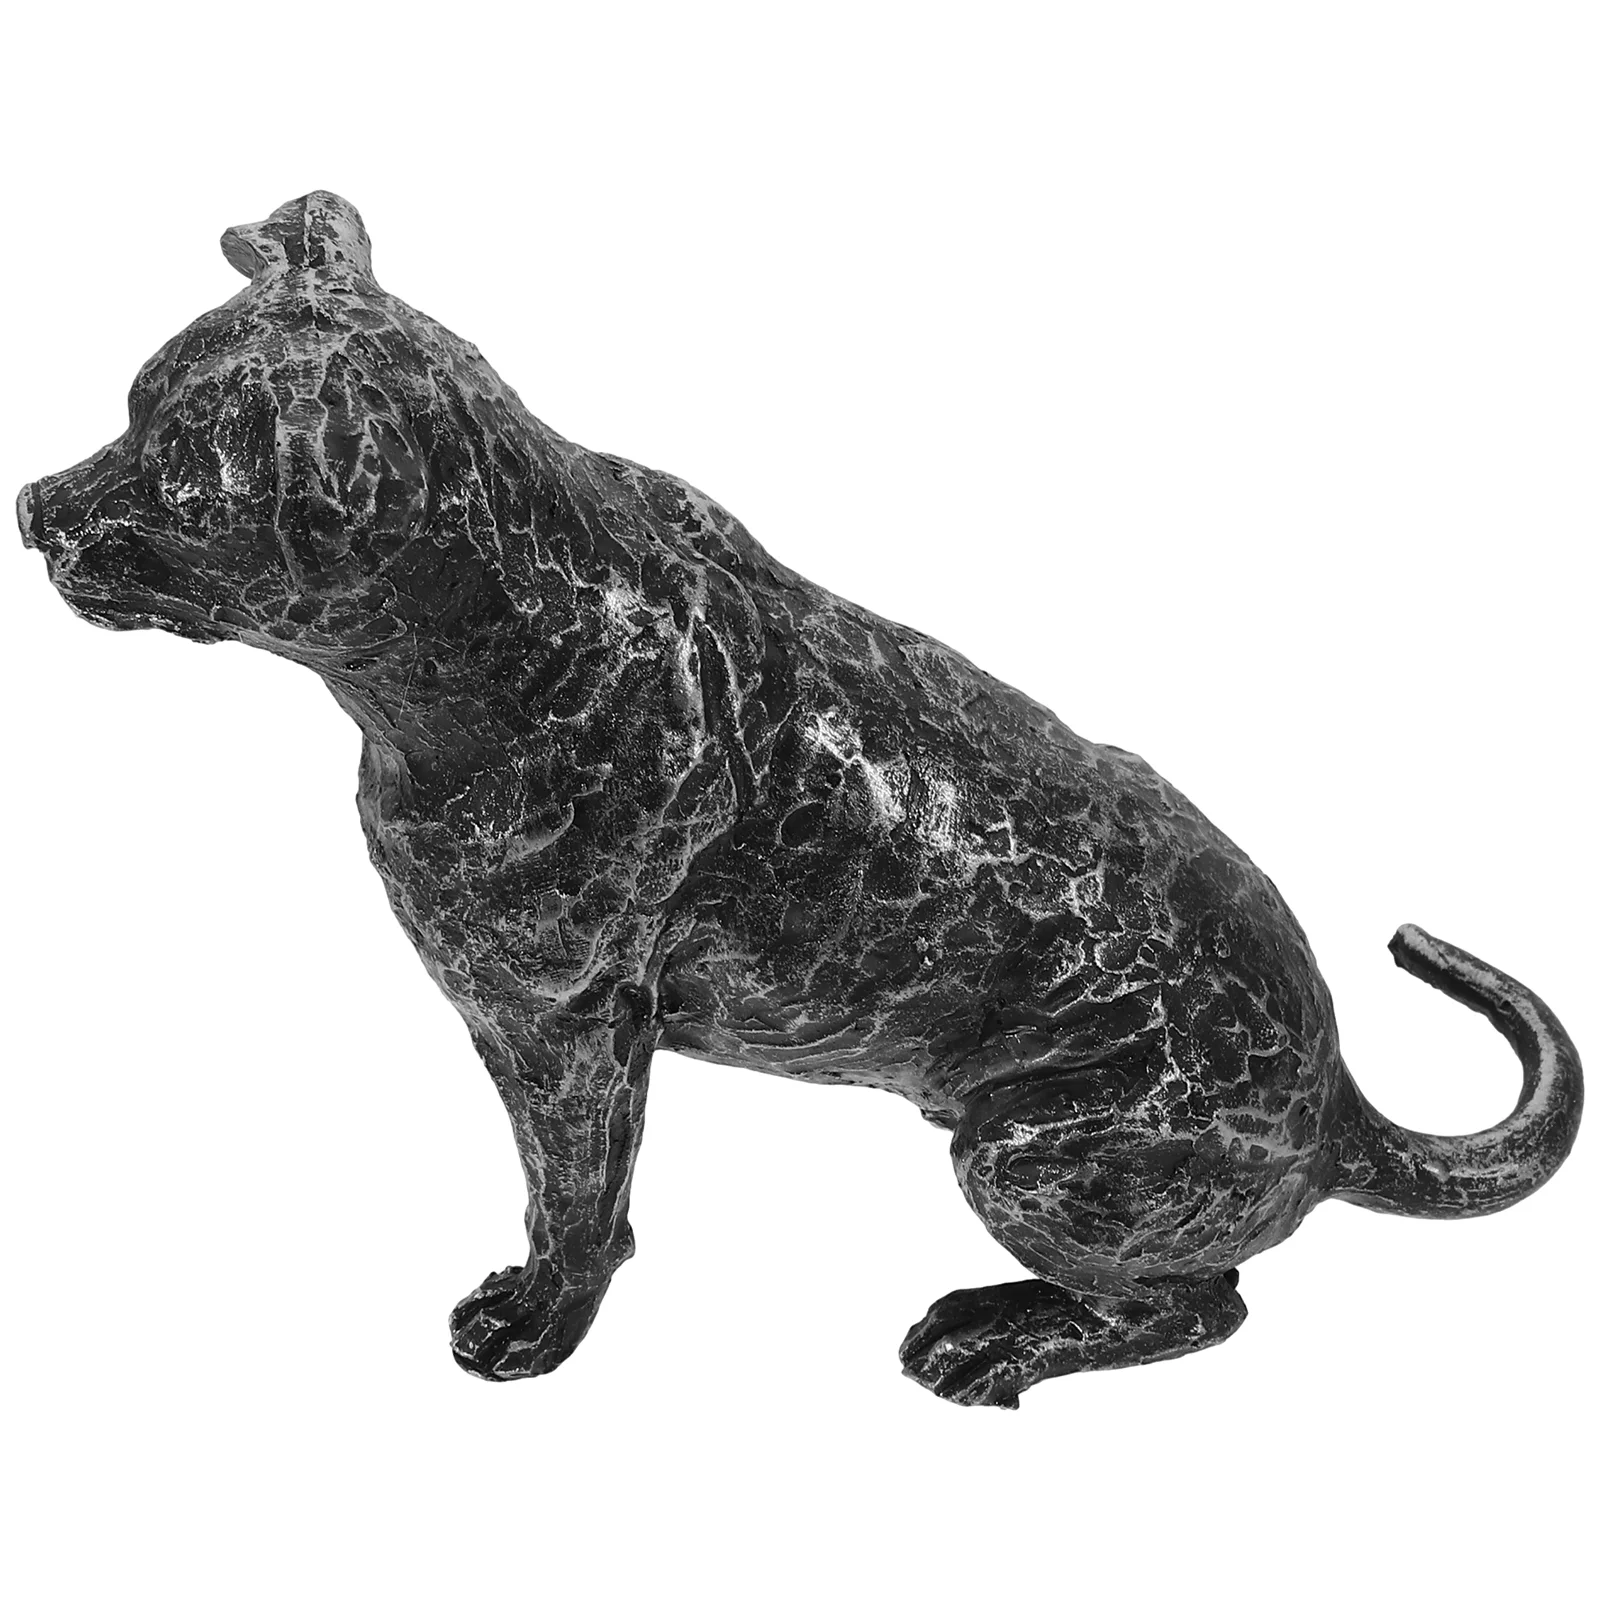 

Animal Statue Dog Figurine Crafts Resin Ornament Garden Home Decor Adorable Puppy Statues Outdoor